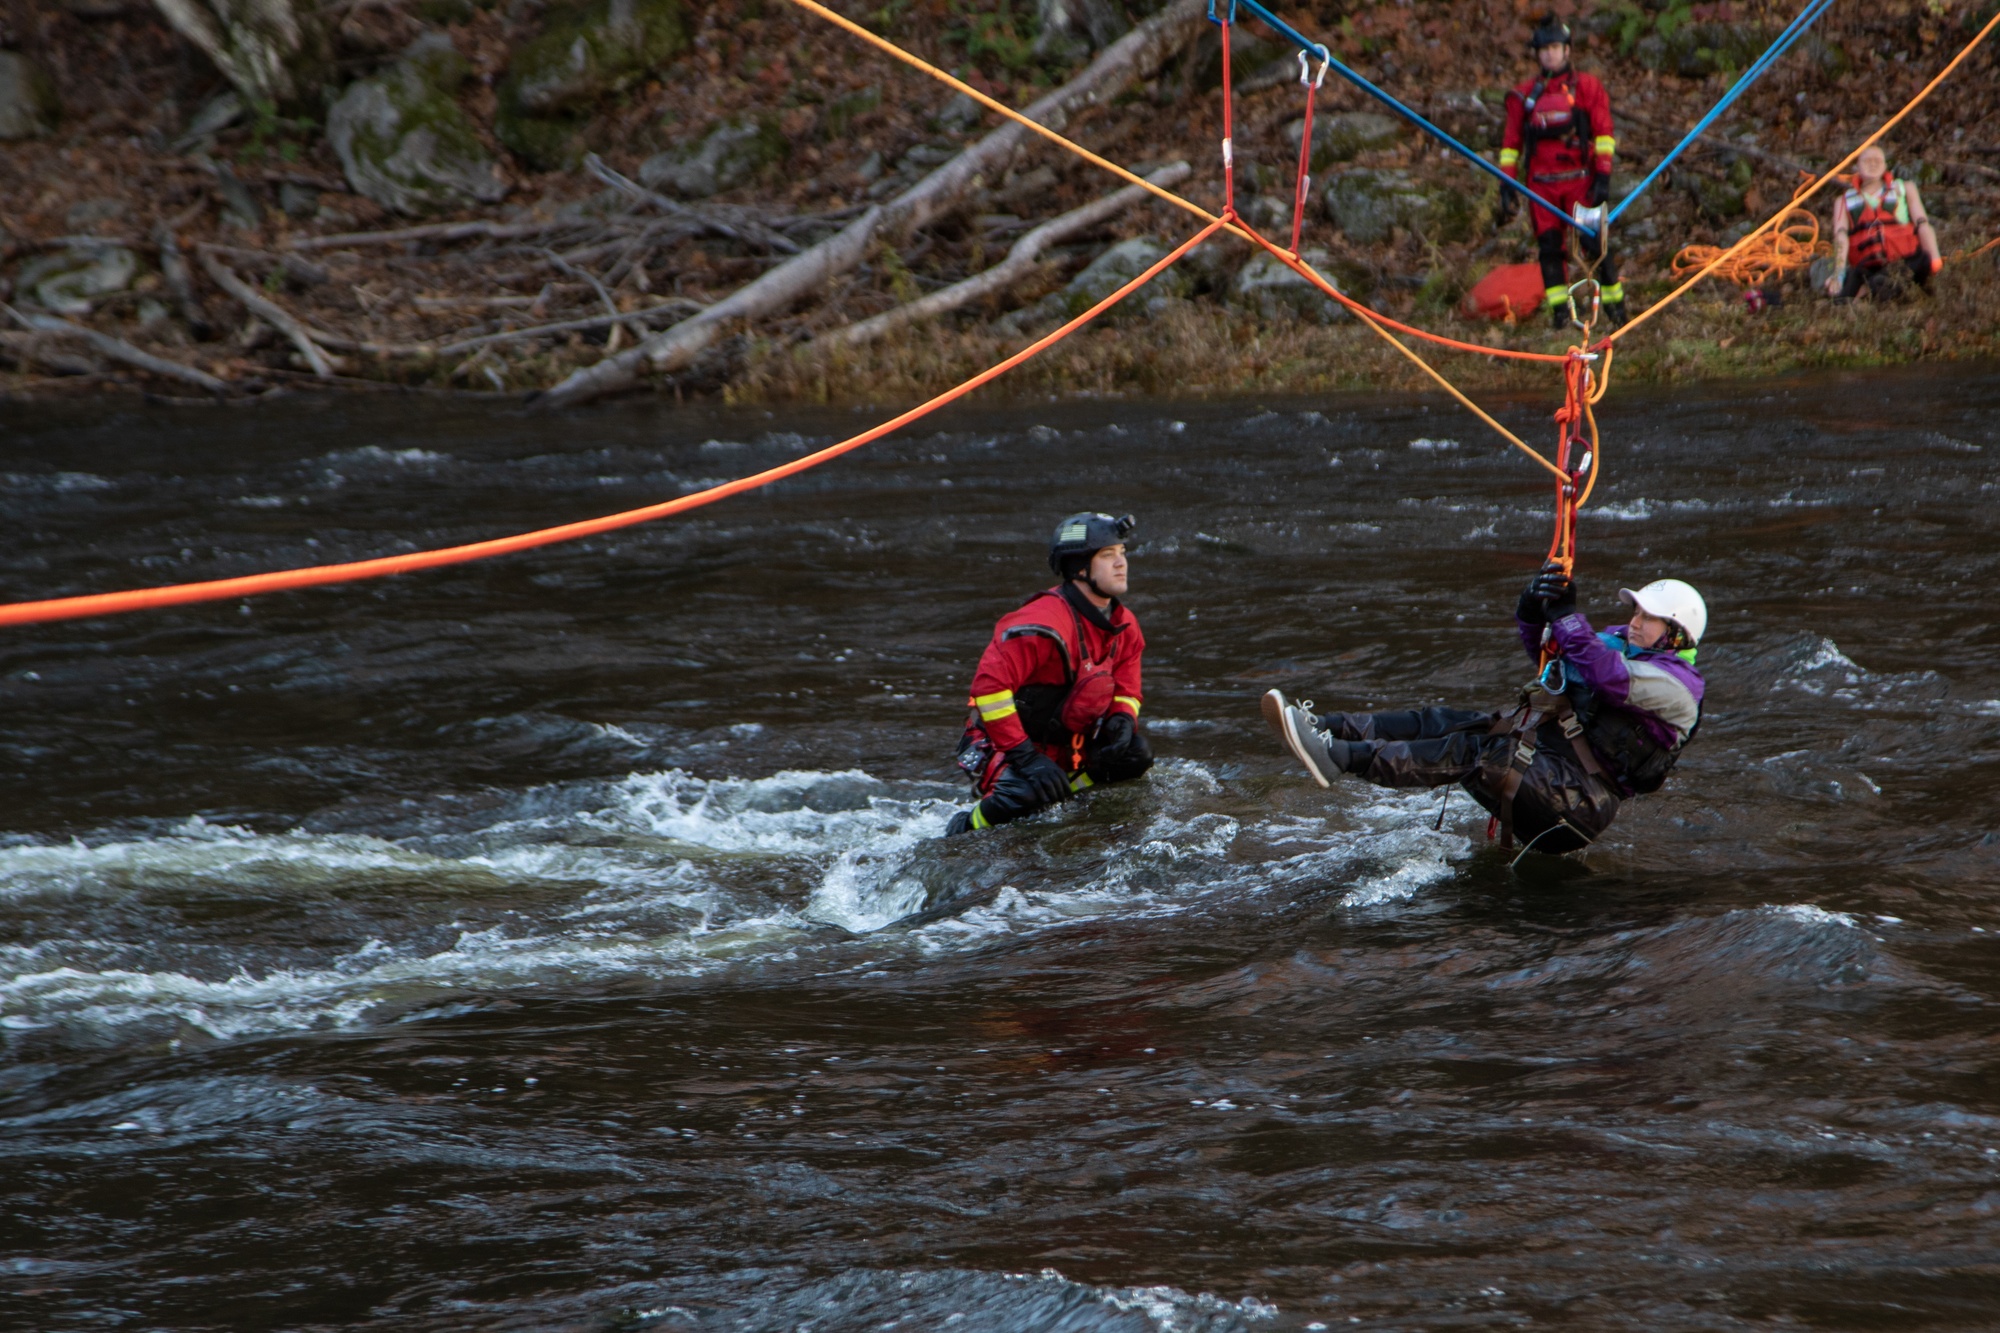 DVIDS - Images - West Virginia Swift Water Rescue Team